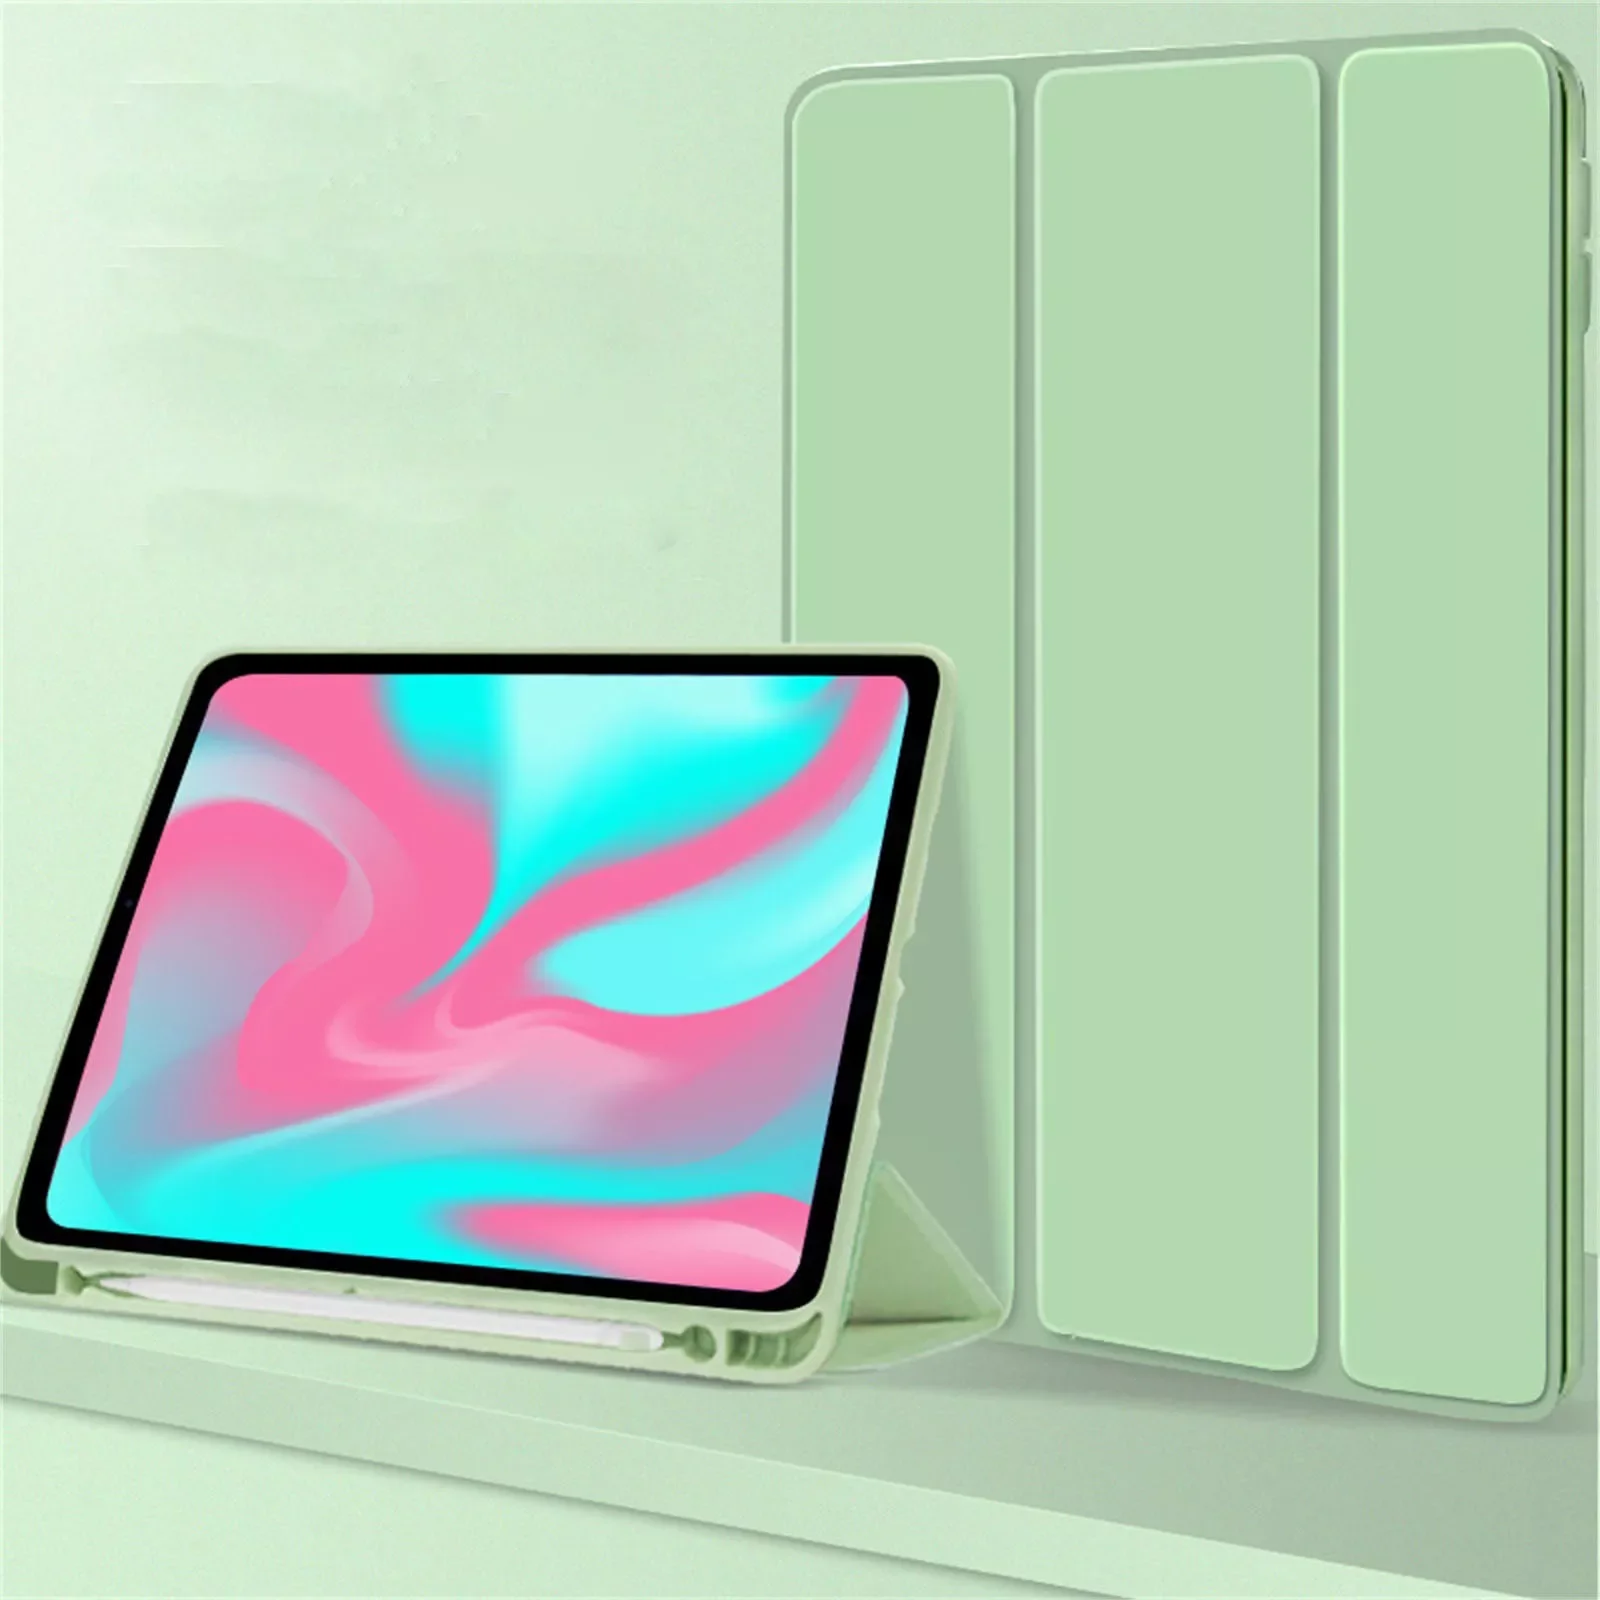 Smart Case For Ipad Pro 12.9 2021 Pencil Holder Stand Cover Auto Sleep/wake Laptop Accessories Free Shipping Items Dropshiping